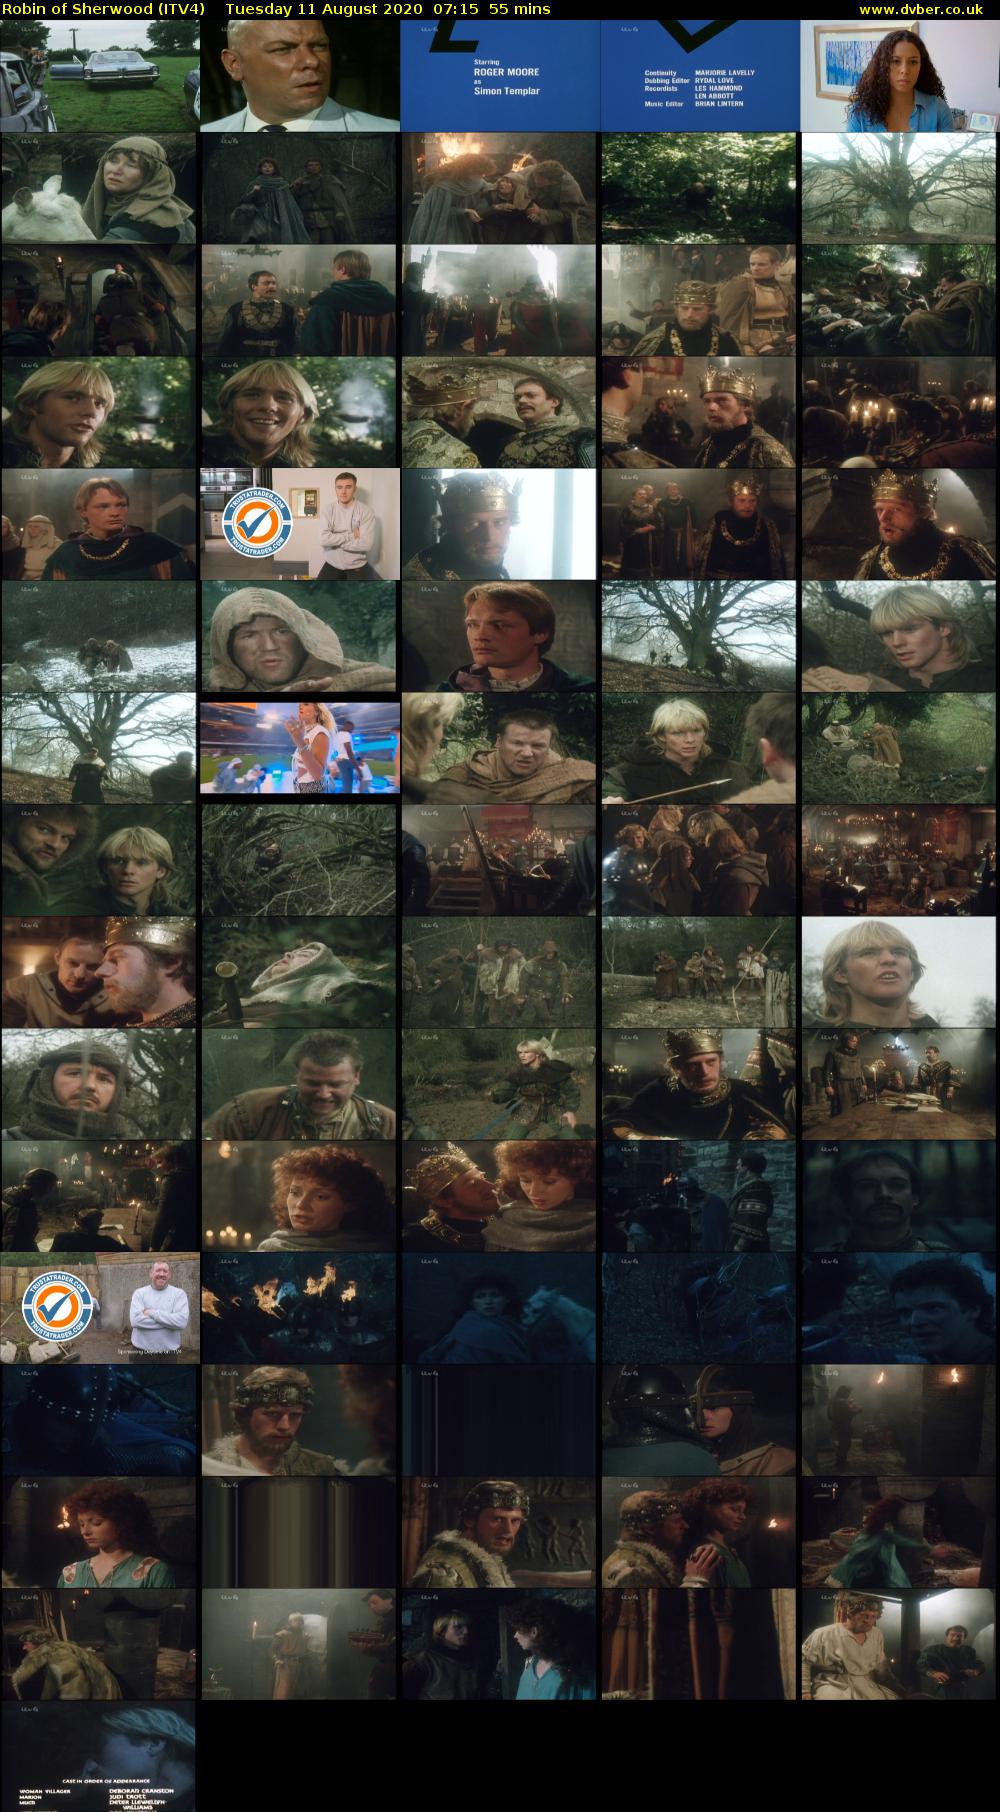 Robin of Sherwood (ITV4) Tuesday 11 August 2020 07:15 - 08:10